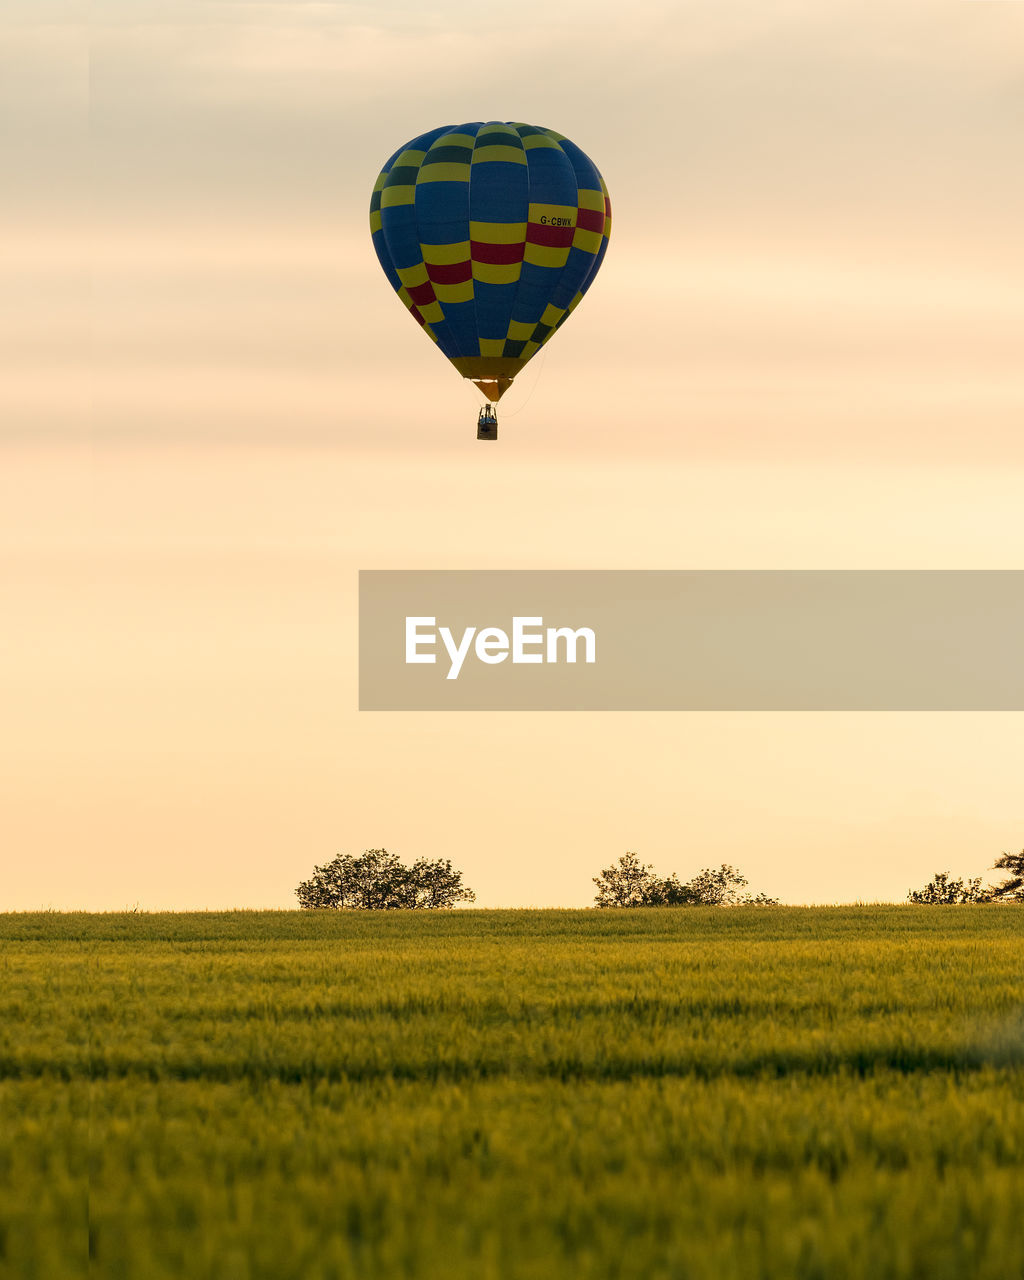 Hot air balloons flying over field against sky during sunset